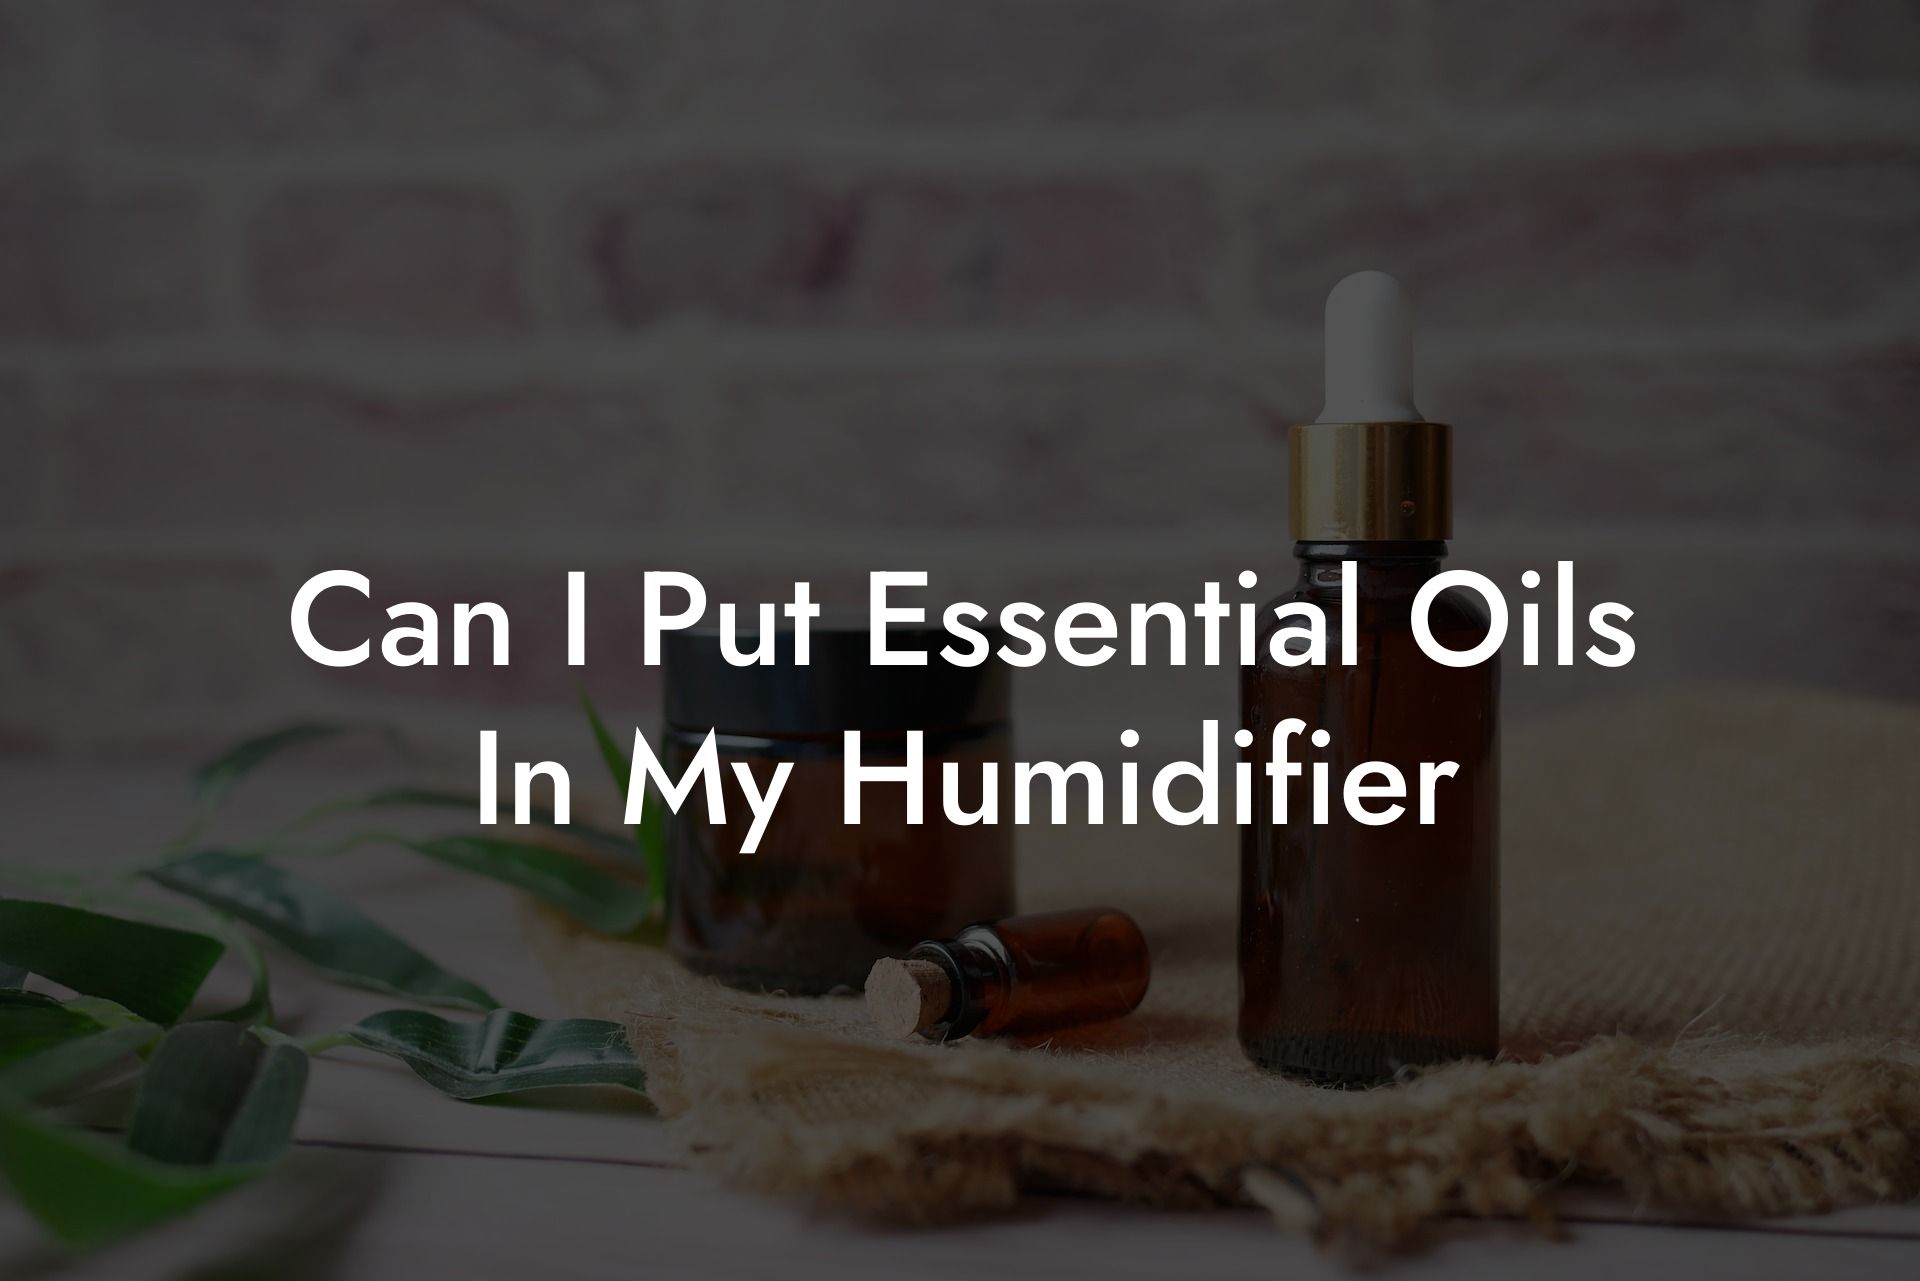 Can I Put Essential Oils In My Humidifier